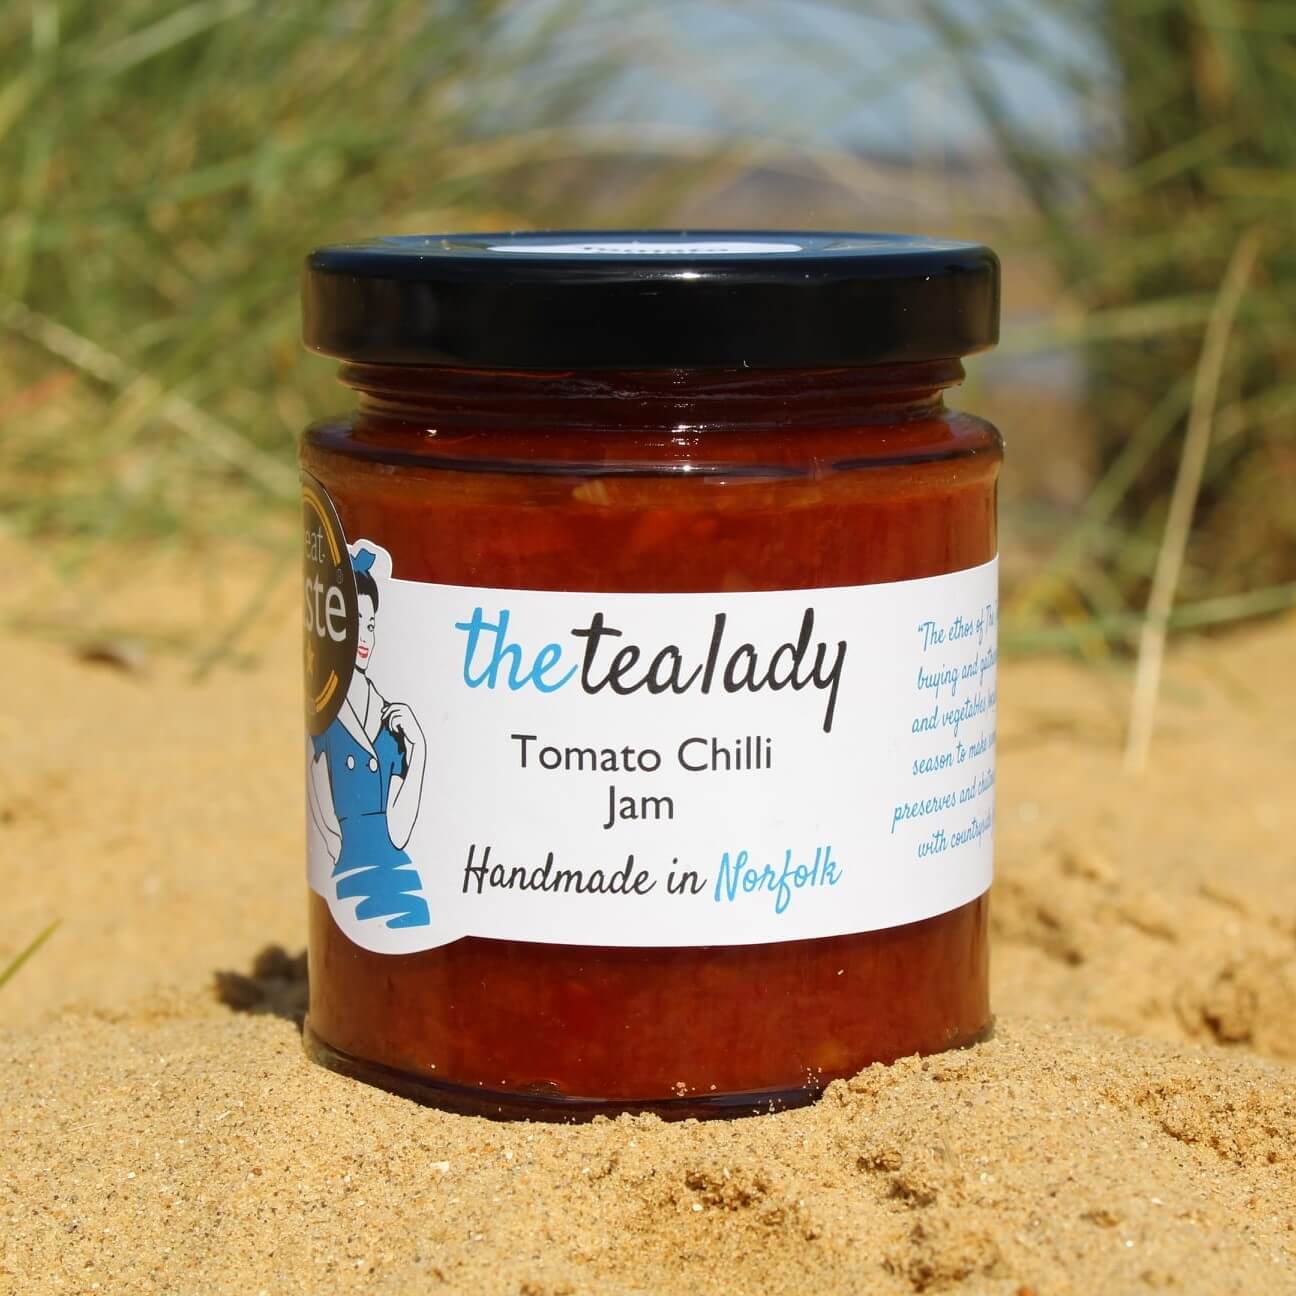 Image of Tomato Chilli Jam made in the UK by The Tealady. Buying this product supports a UK business, jobs and the local community